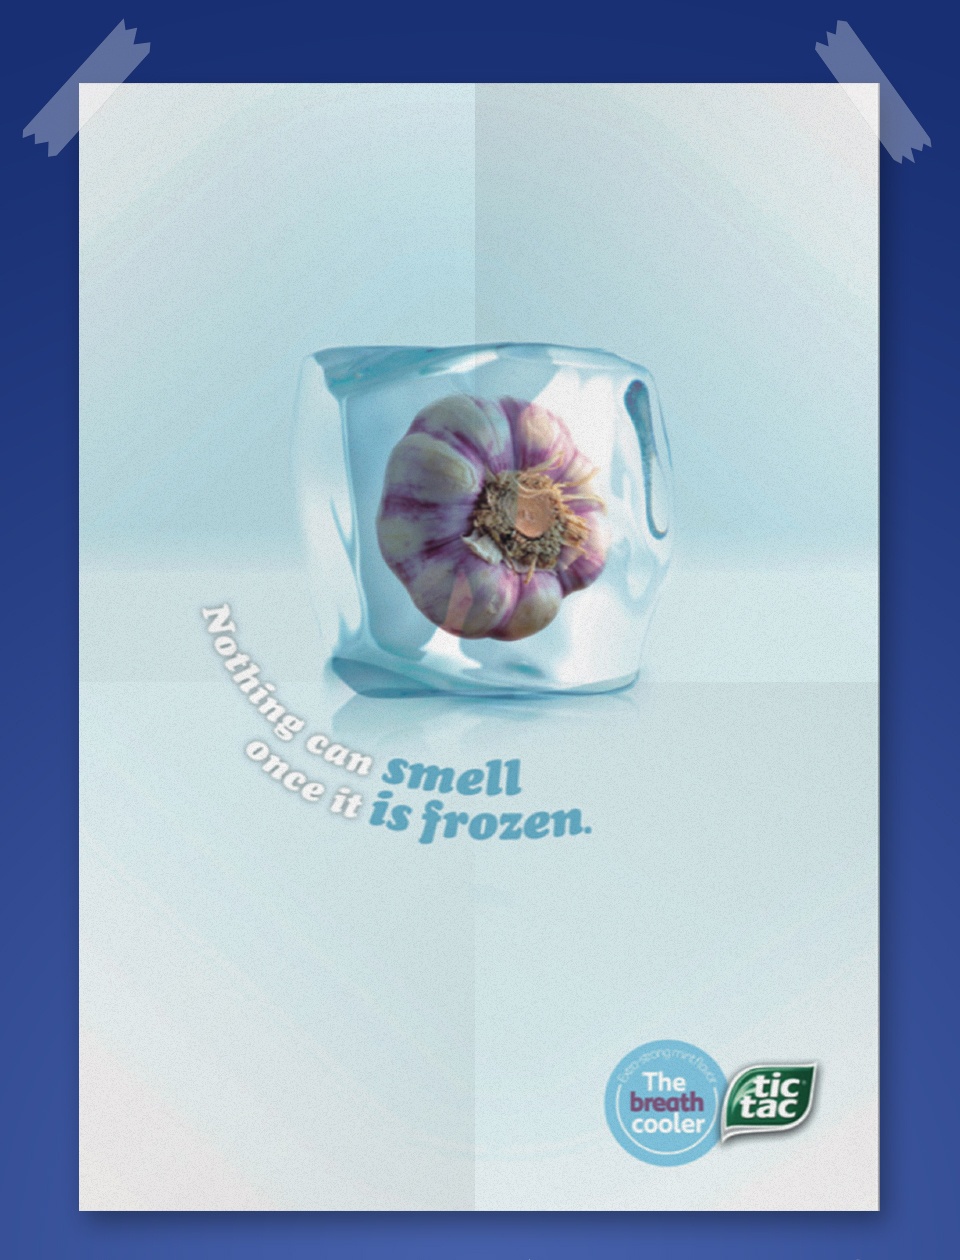 TICTAC "the breath cooler"